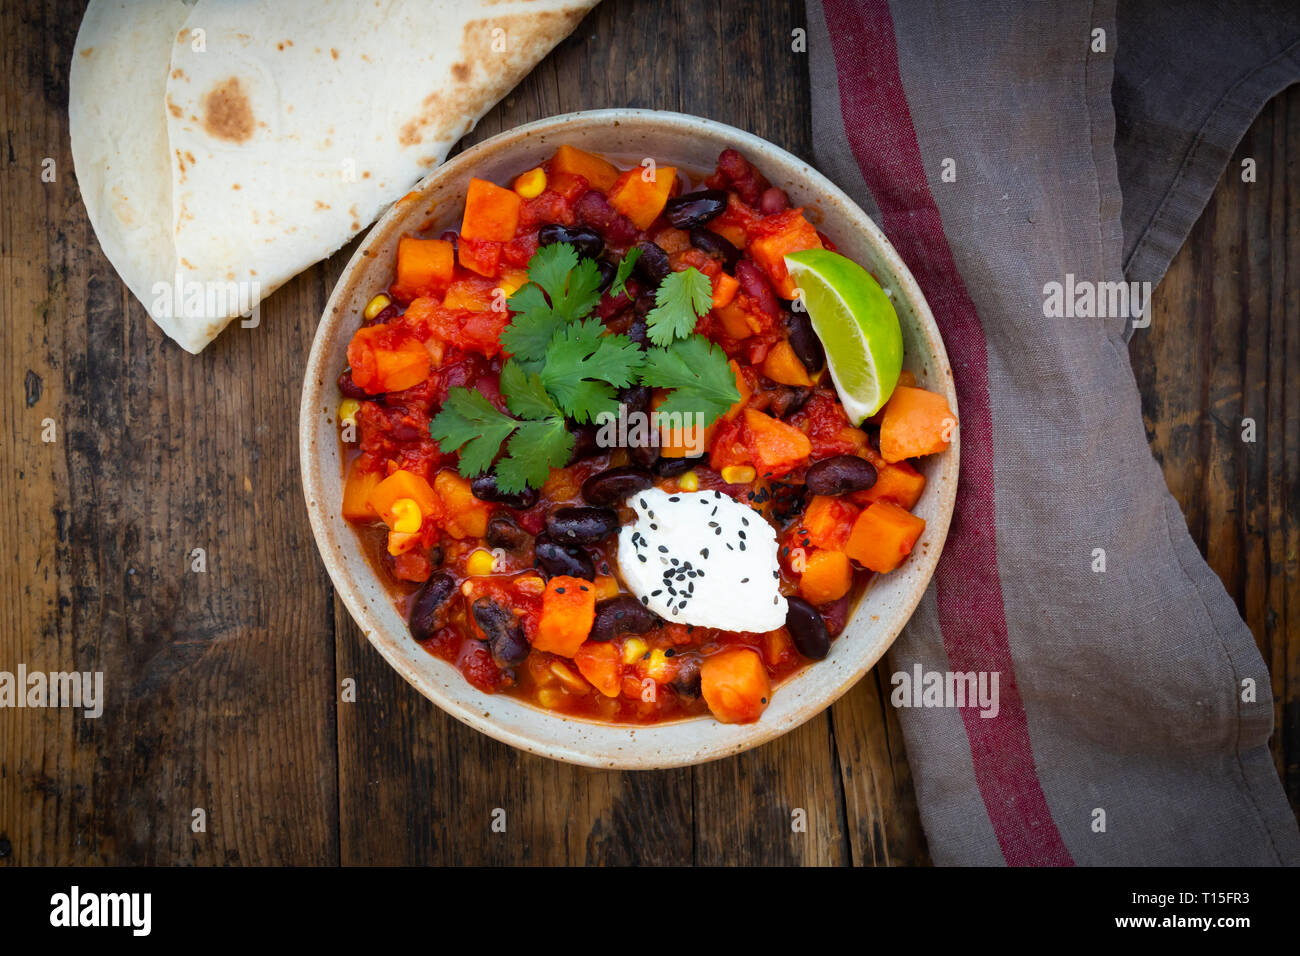 Bowl of Chili sin Carne and flat bread Stock Photo